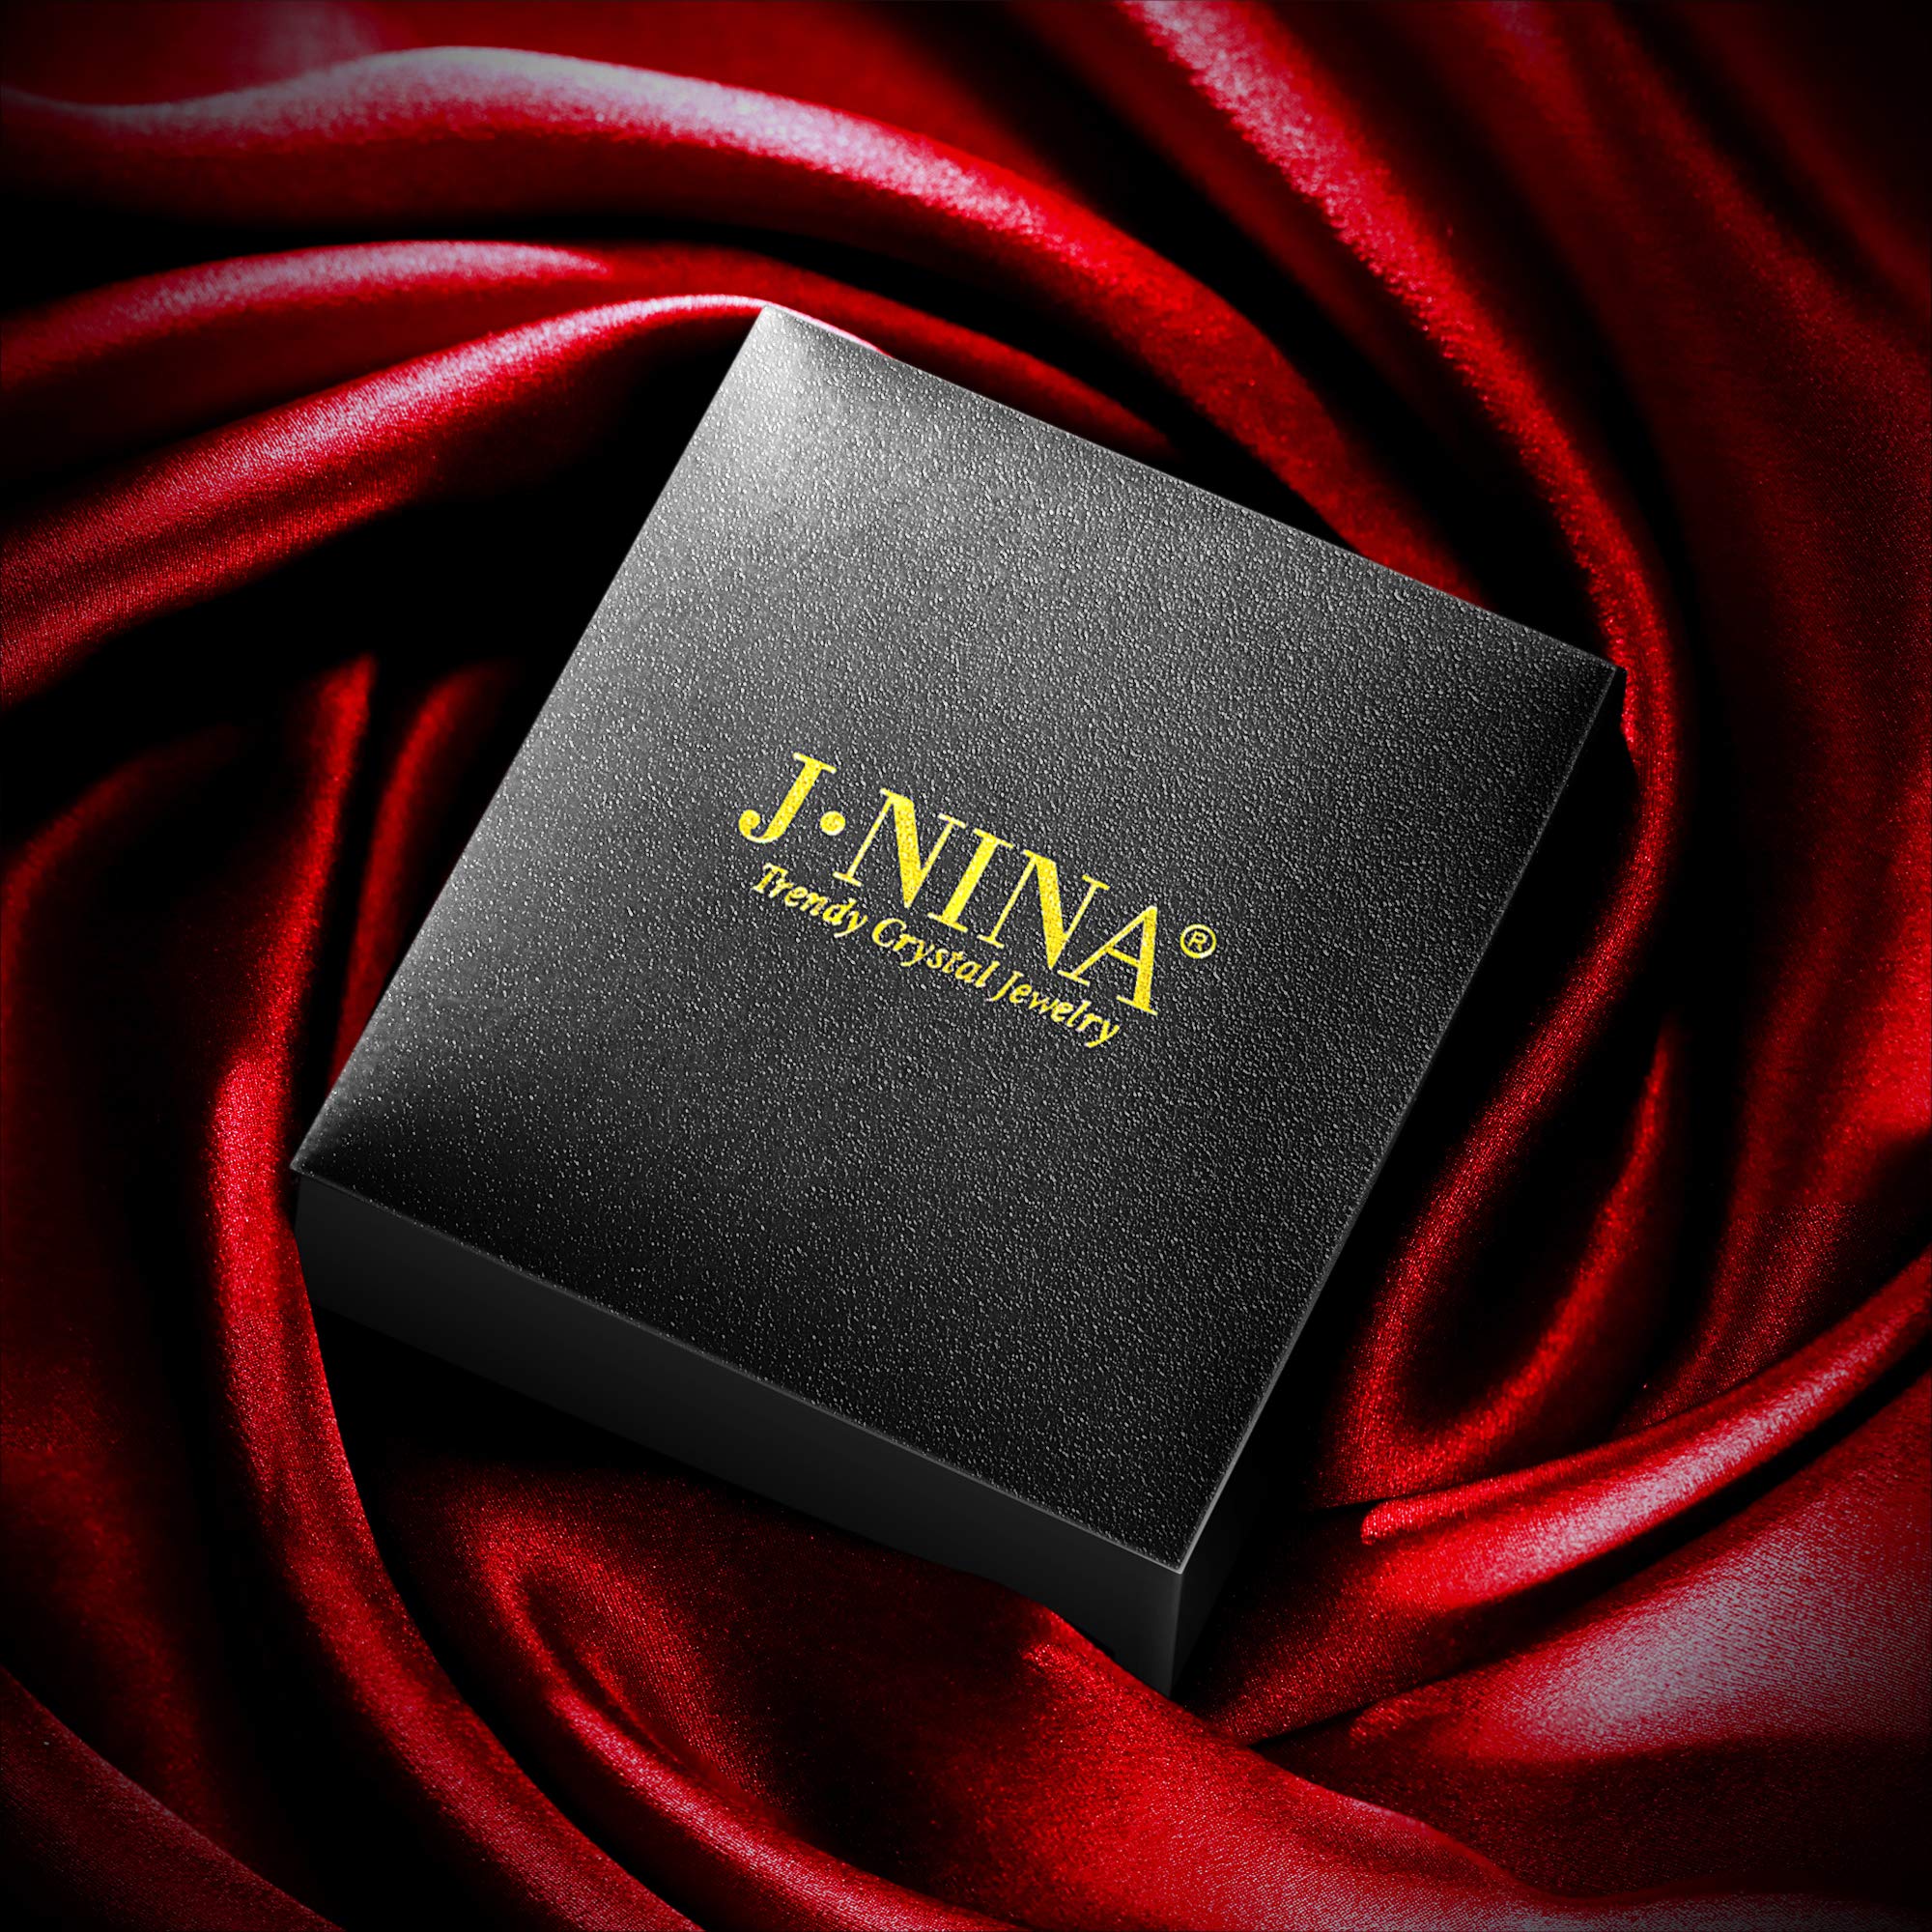 J.NINA Charming Bracelet for Women, Double Heart/Four-leaf/Round/Heart Bracelets with Crystals&Cubic Zirconia, with Luxury Jewelry Box, Valentine's Day, Birthday, Mother's Day Gift for Her Wife Daughter